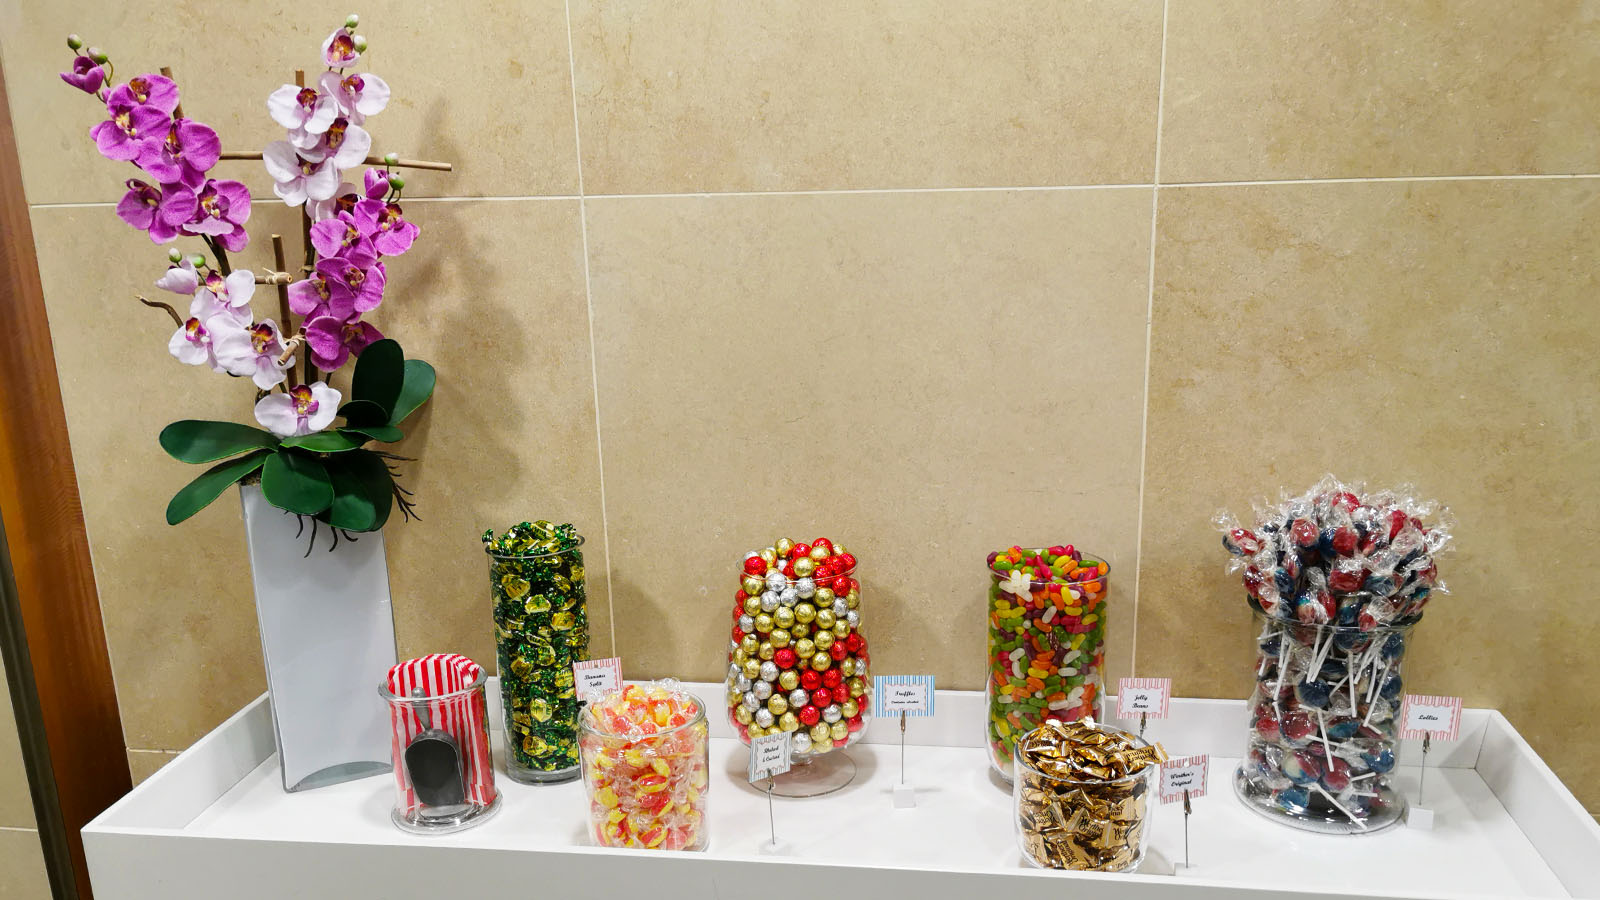 Lollies in the American Airlines International First Class Lounge, London Heathrow